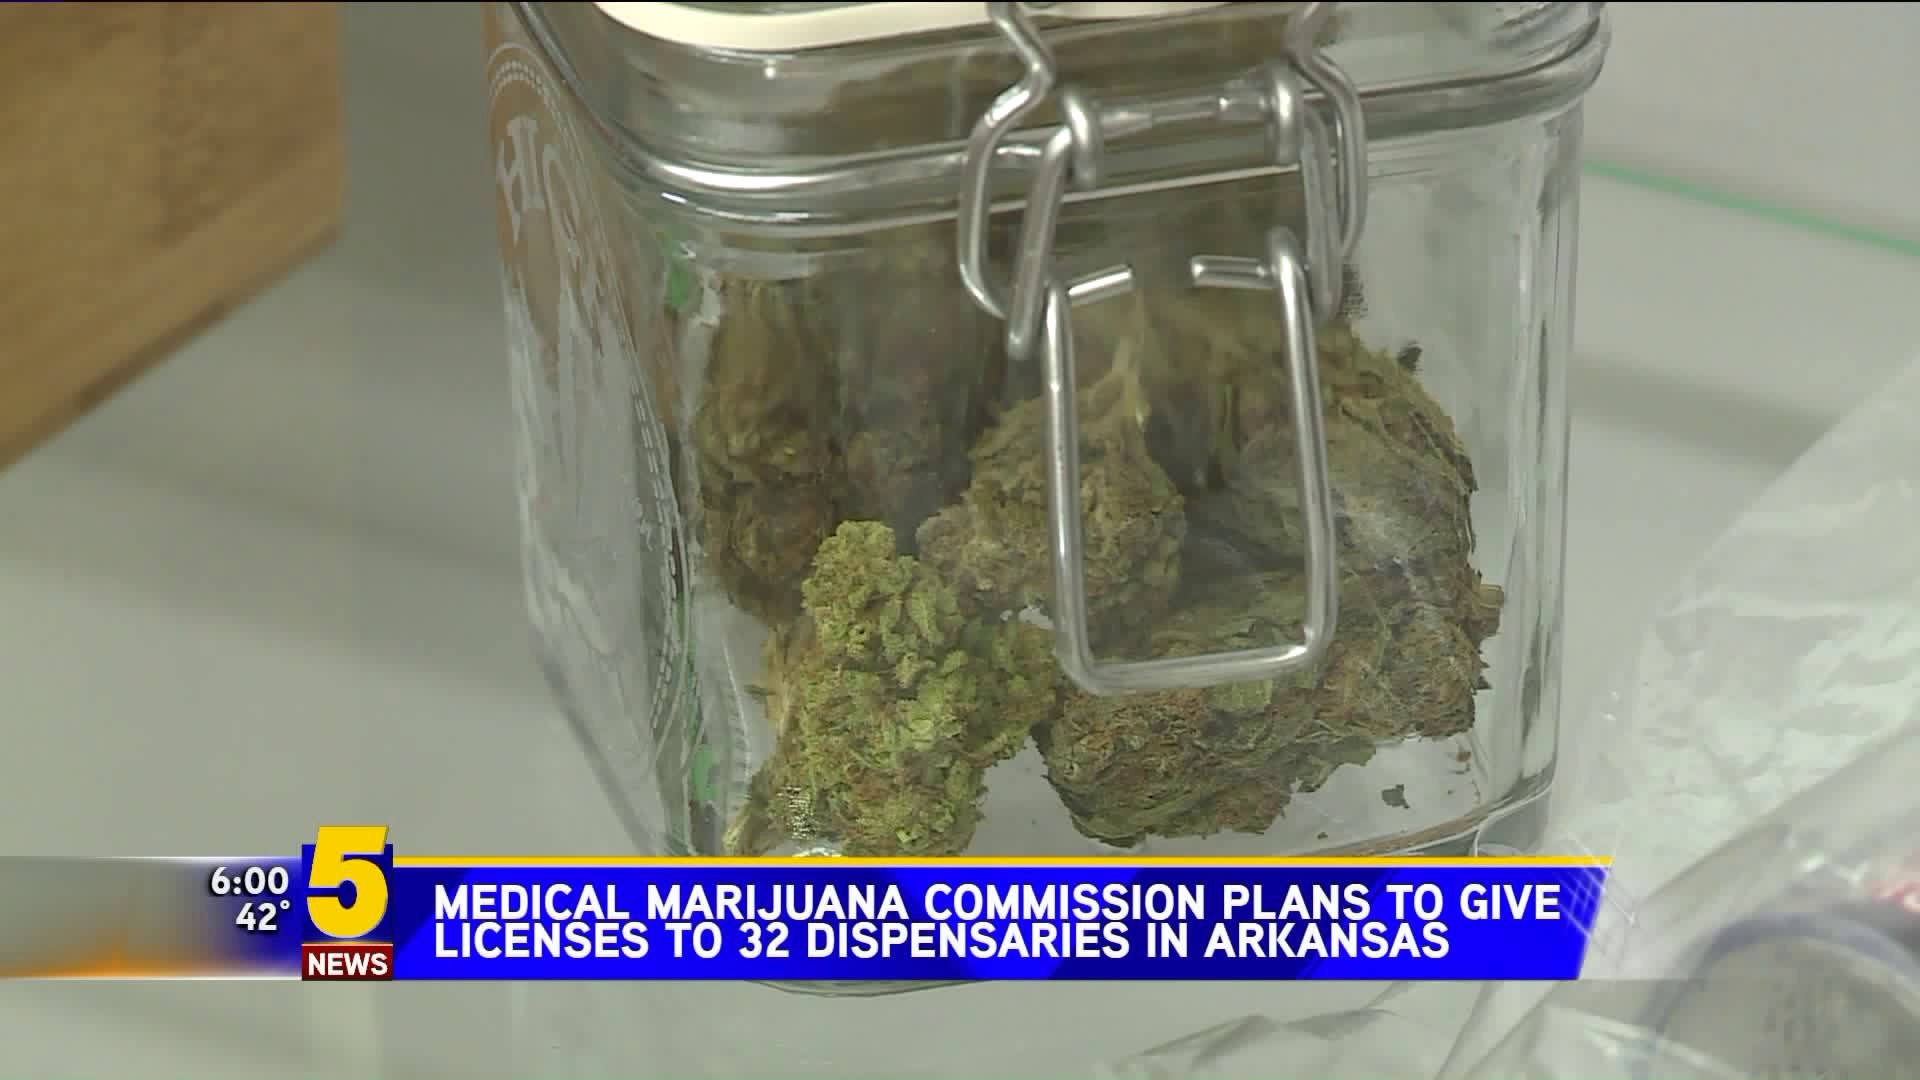 Medical Marijuana Commission To Give Licenses To 32 Dispensaries In Arkansas